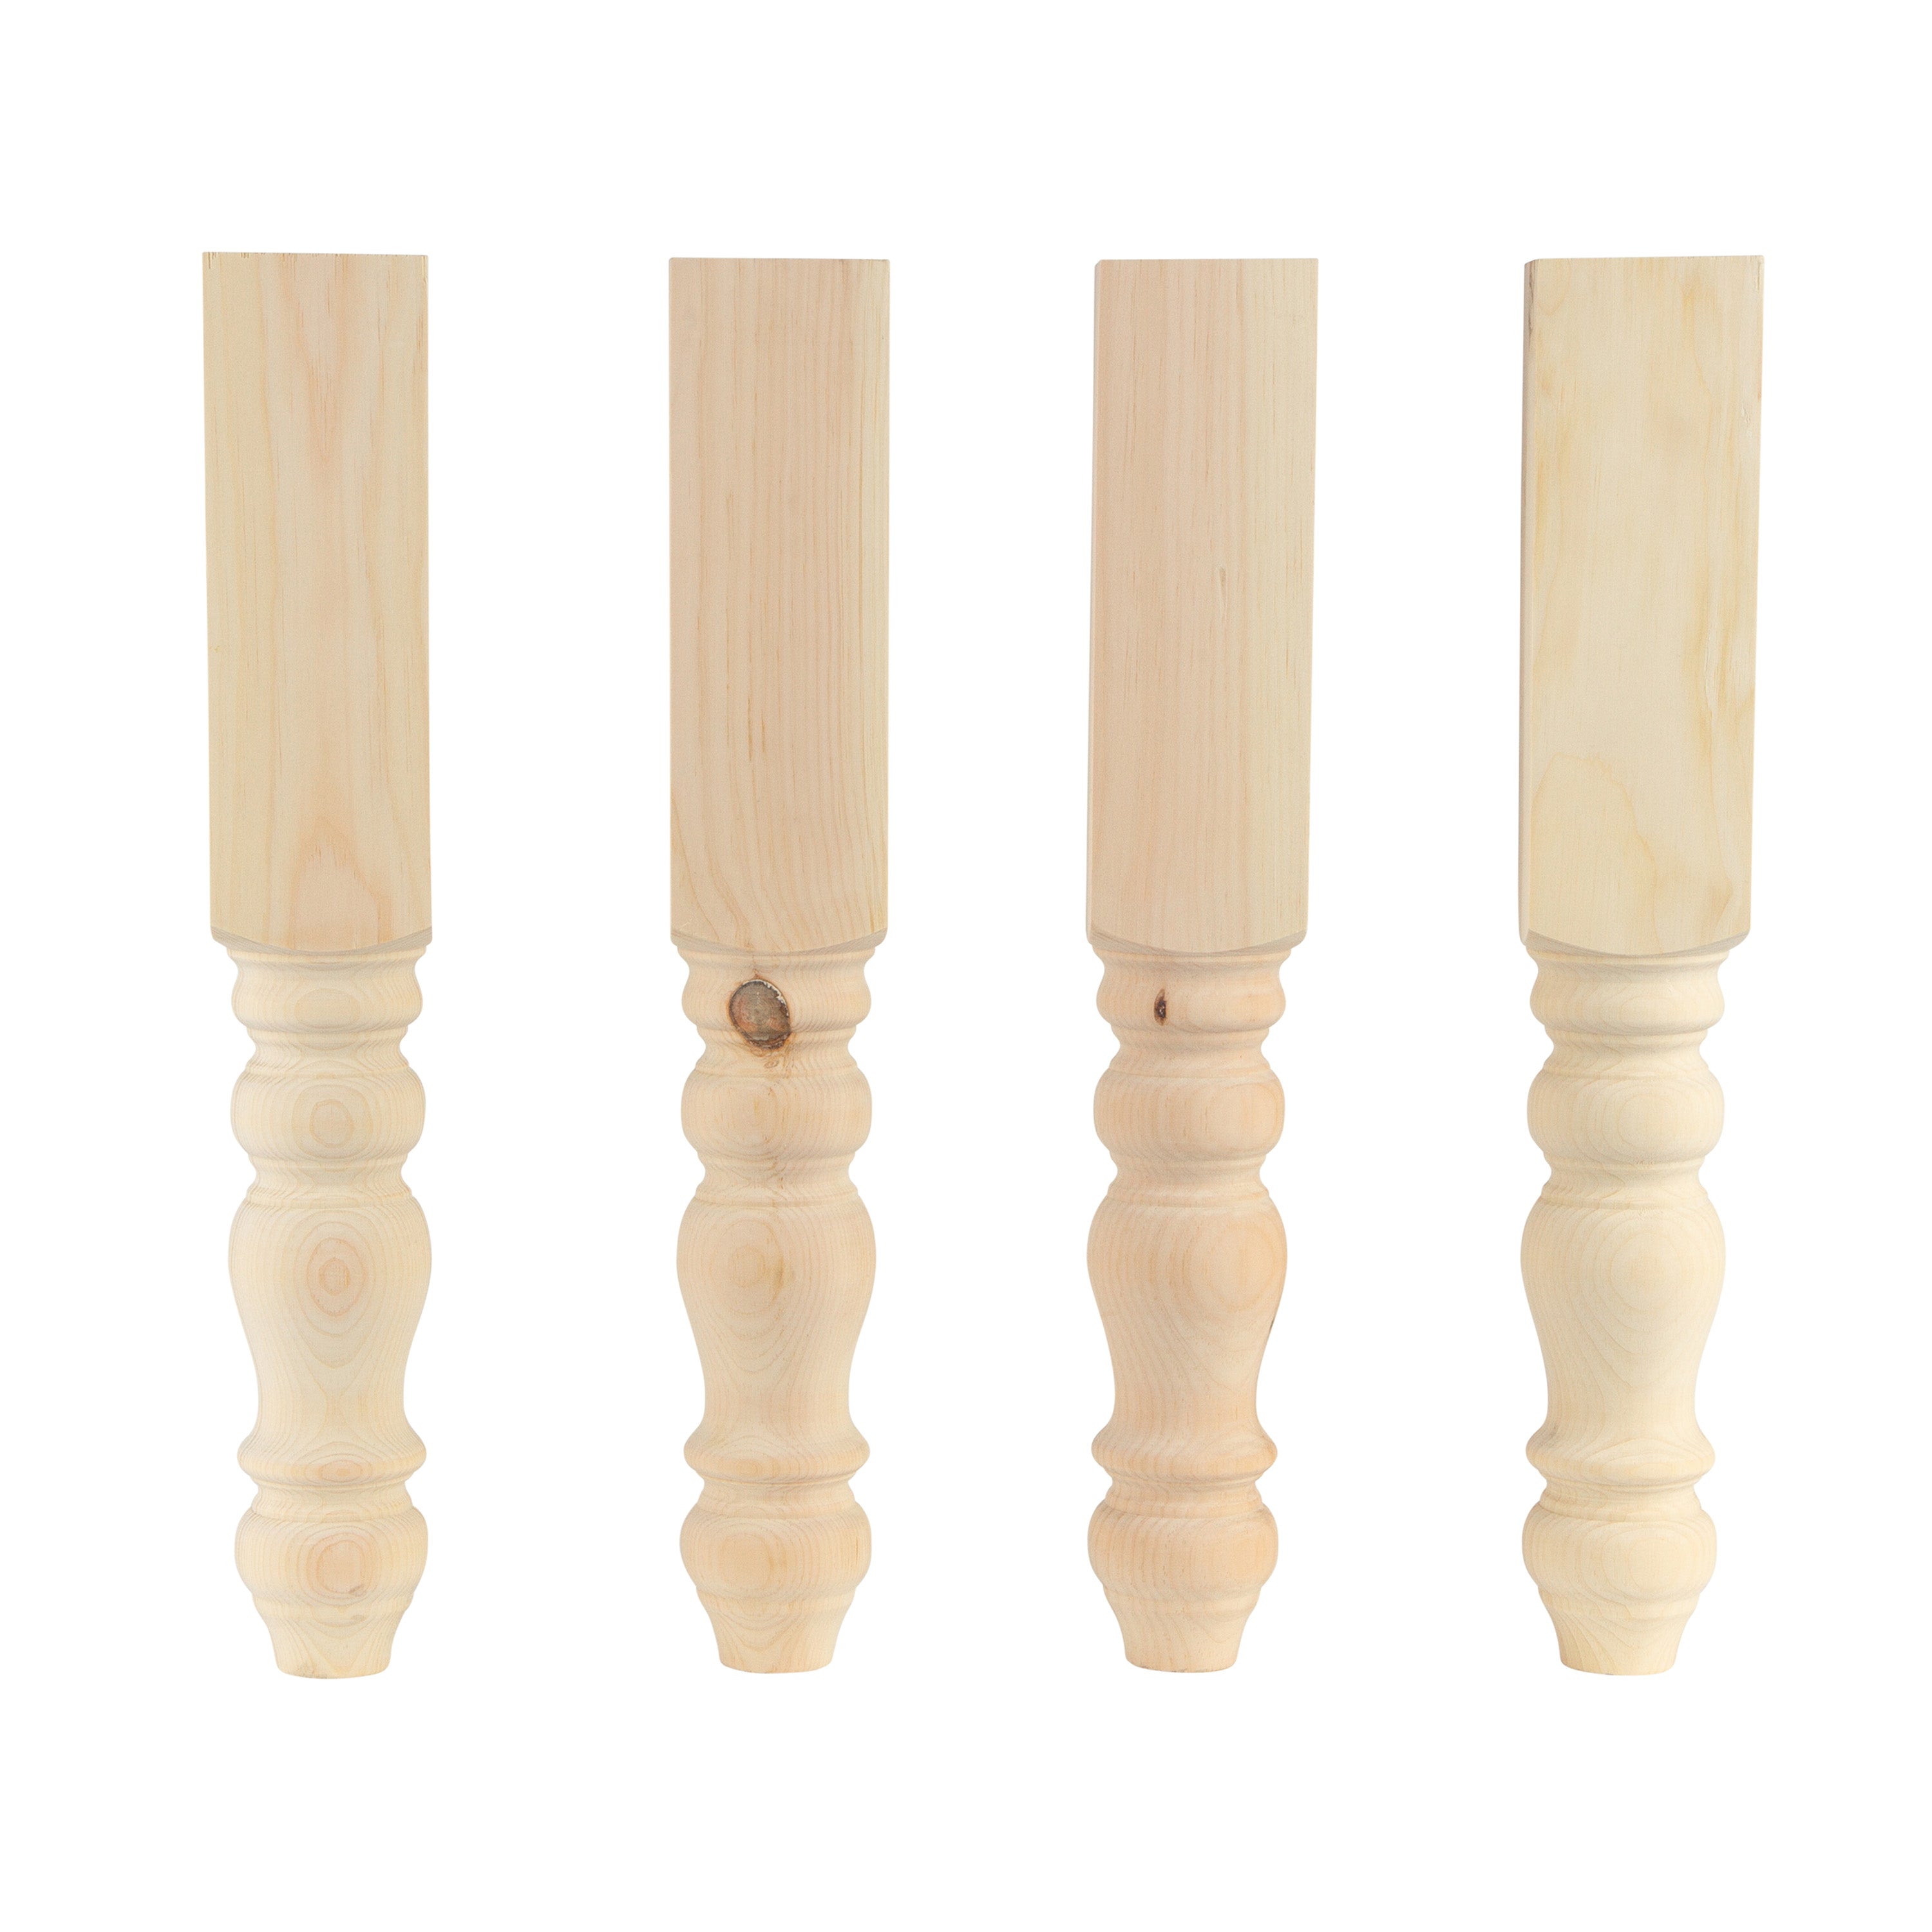 Pine Chunky Farmhouse End Table Legs - 3.5" x 23" - Sustainably Harvested American Pine - Handmade in NC by Carolina Leg Co